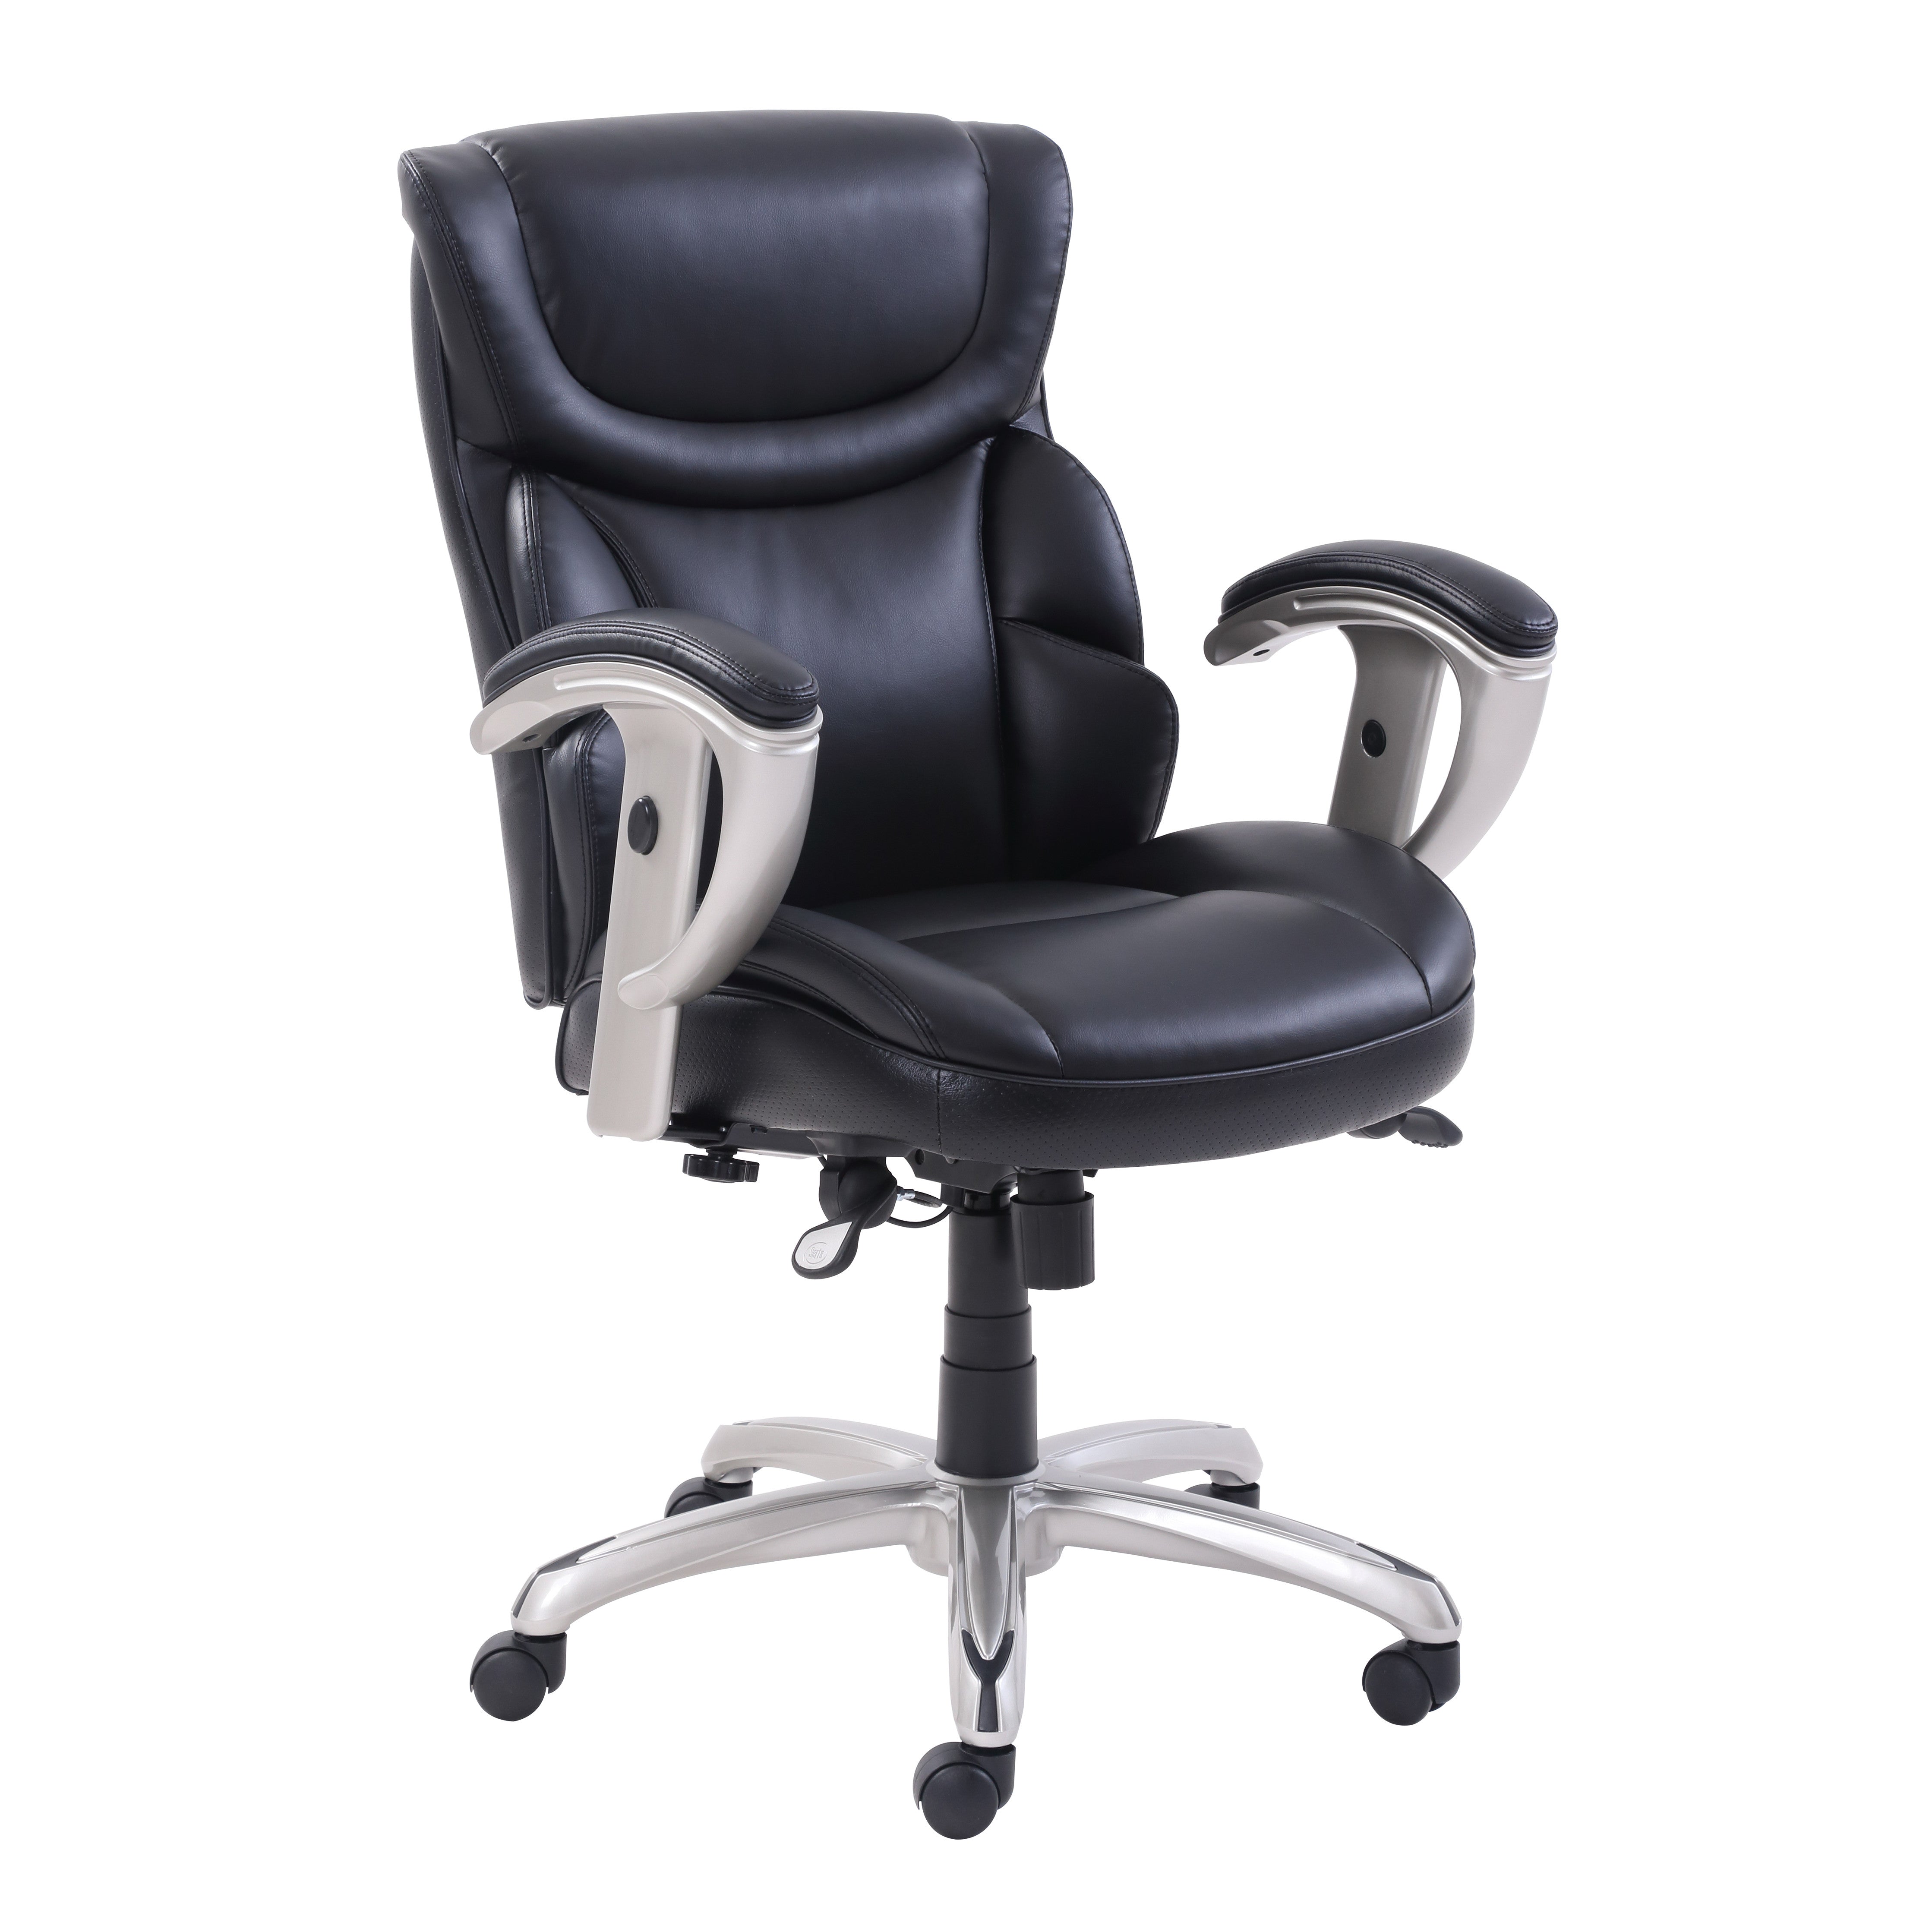 emerson-task-chair-supports-up-to-300-lb-1875-to-2175-seat-height-black-seat-back-silver-base_srj49711blk - 1